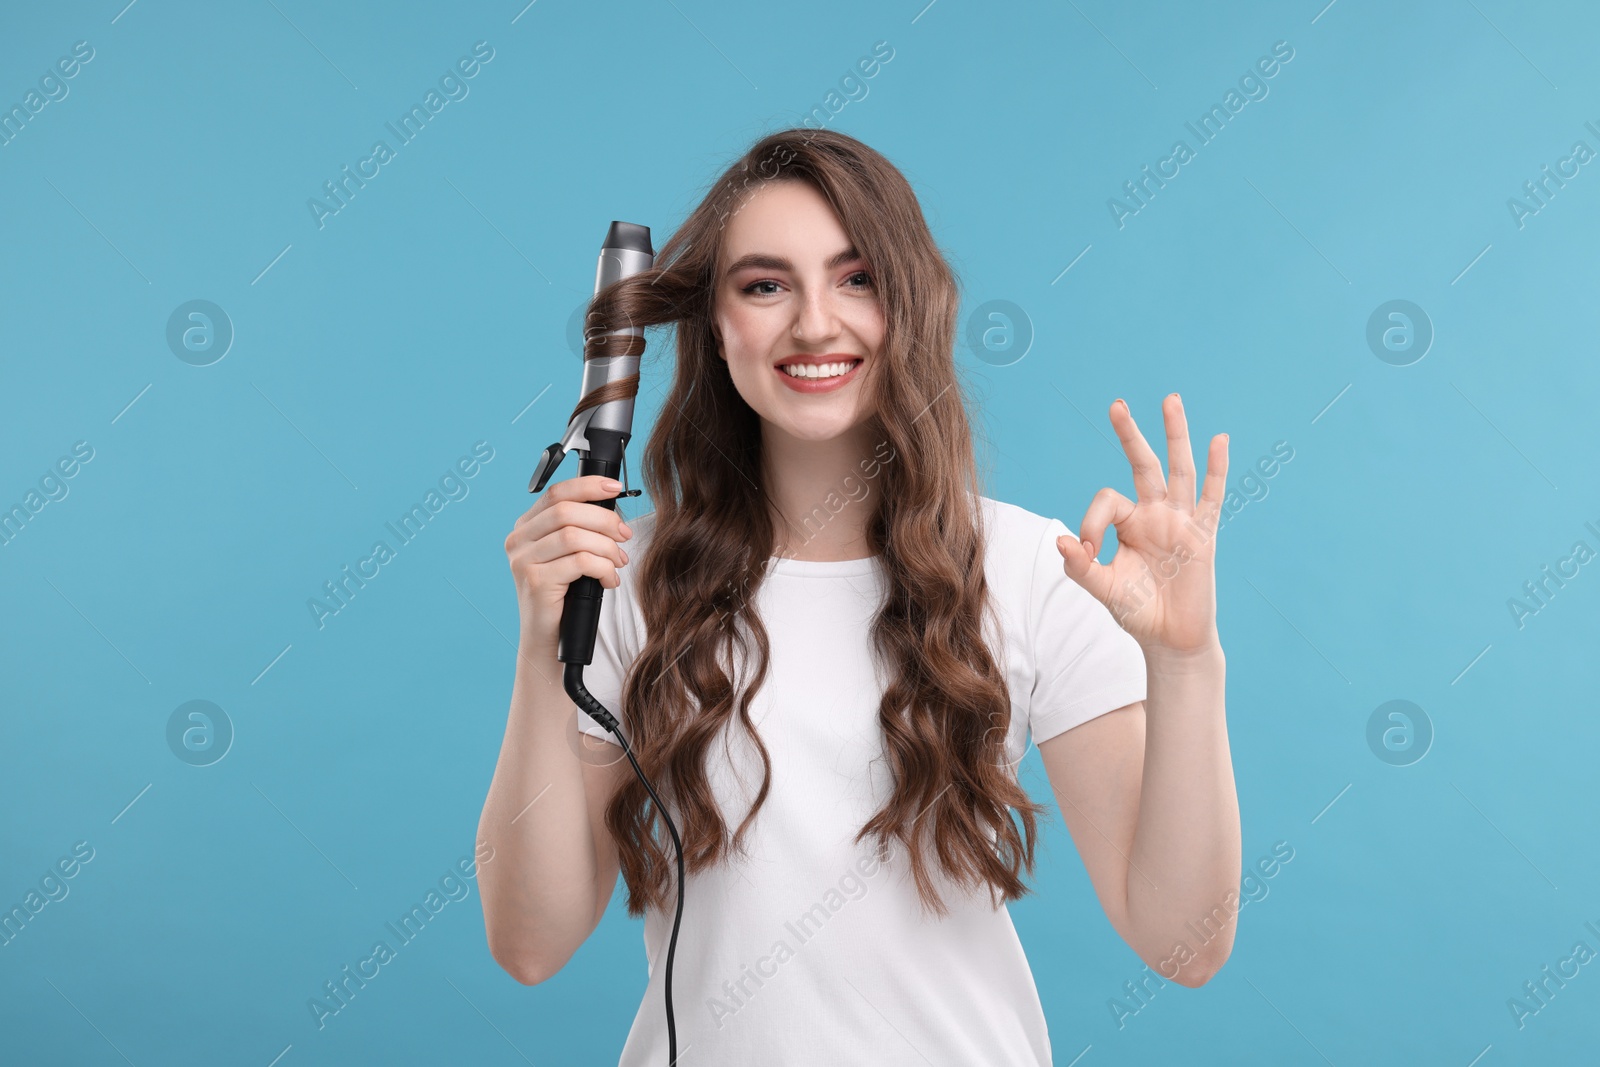 Photo of Beautiful woman showing OK gesture while using curling hair iron on light blue background